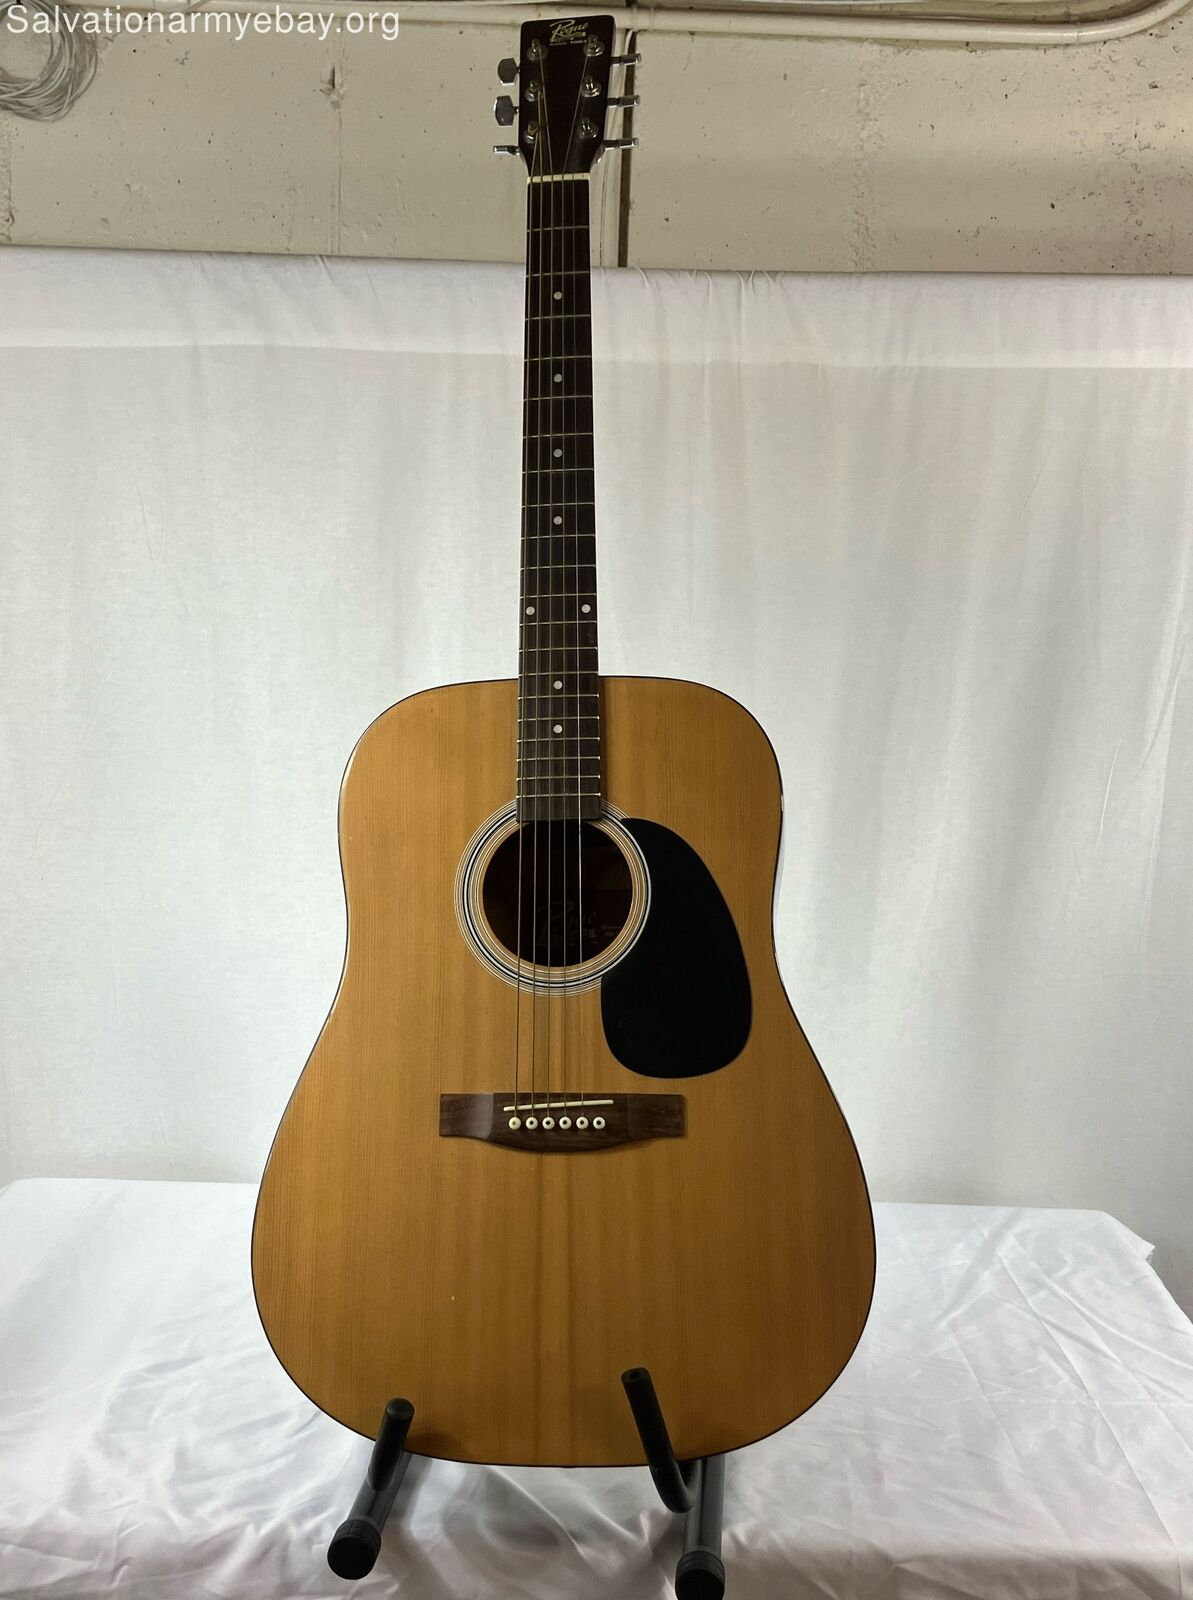 Rogue RA100D Acoustic Guitar [Needs New Strings] [Has Slight Chips on Body] 1